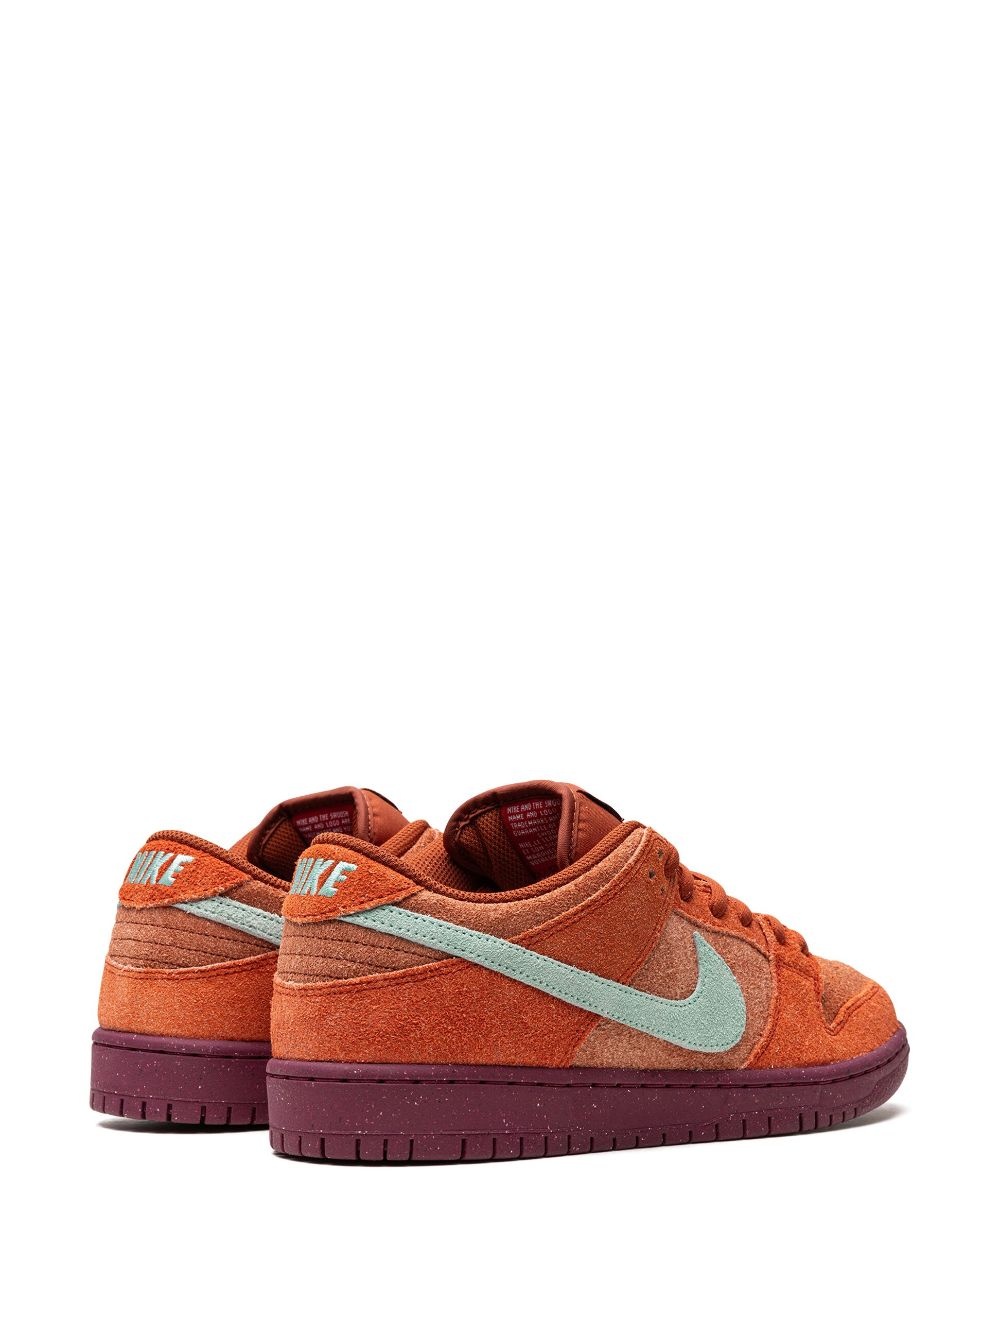 SB Dunk Low Pro Prm "Mystic Red" sneakers - 3